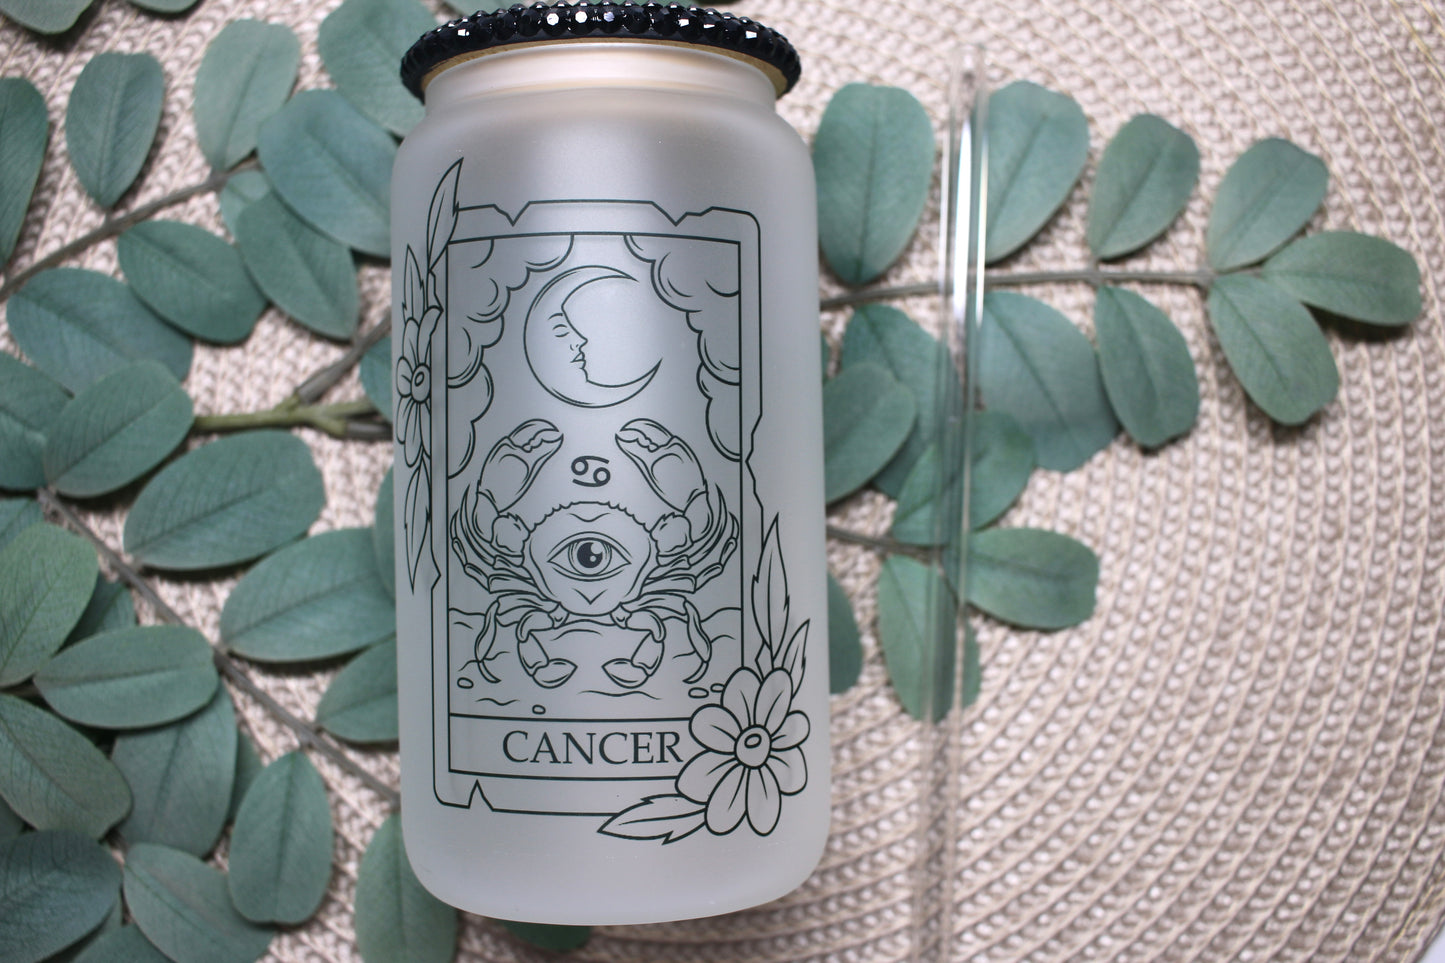 Horoscope glass cup